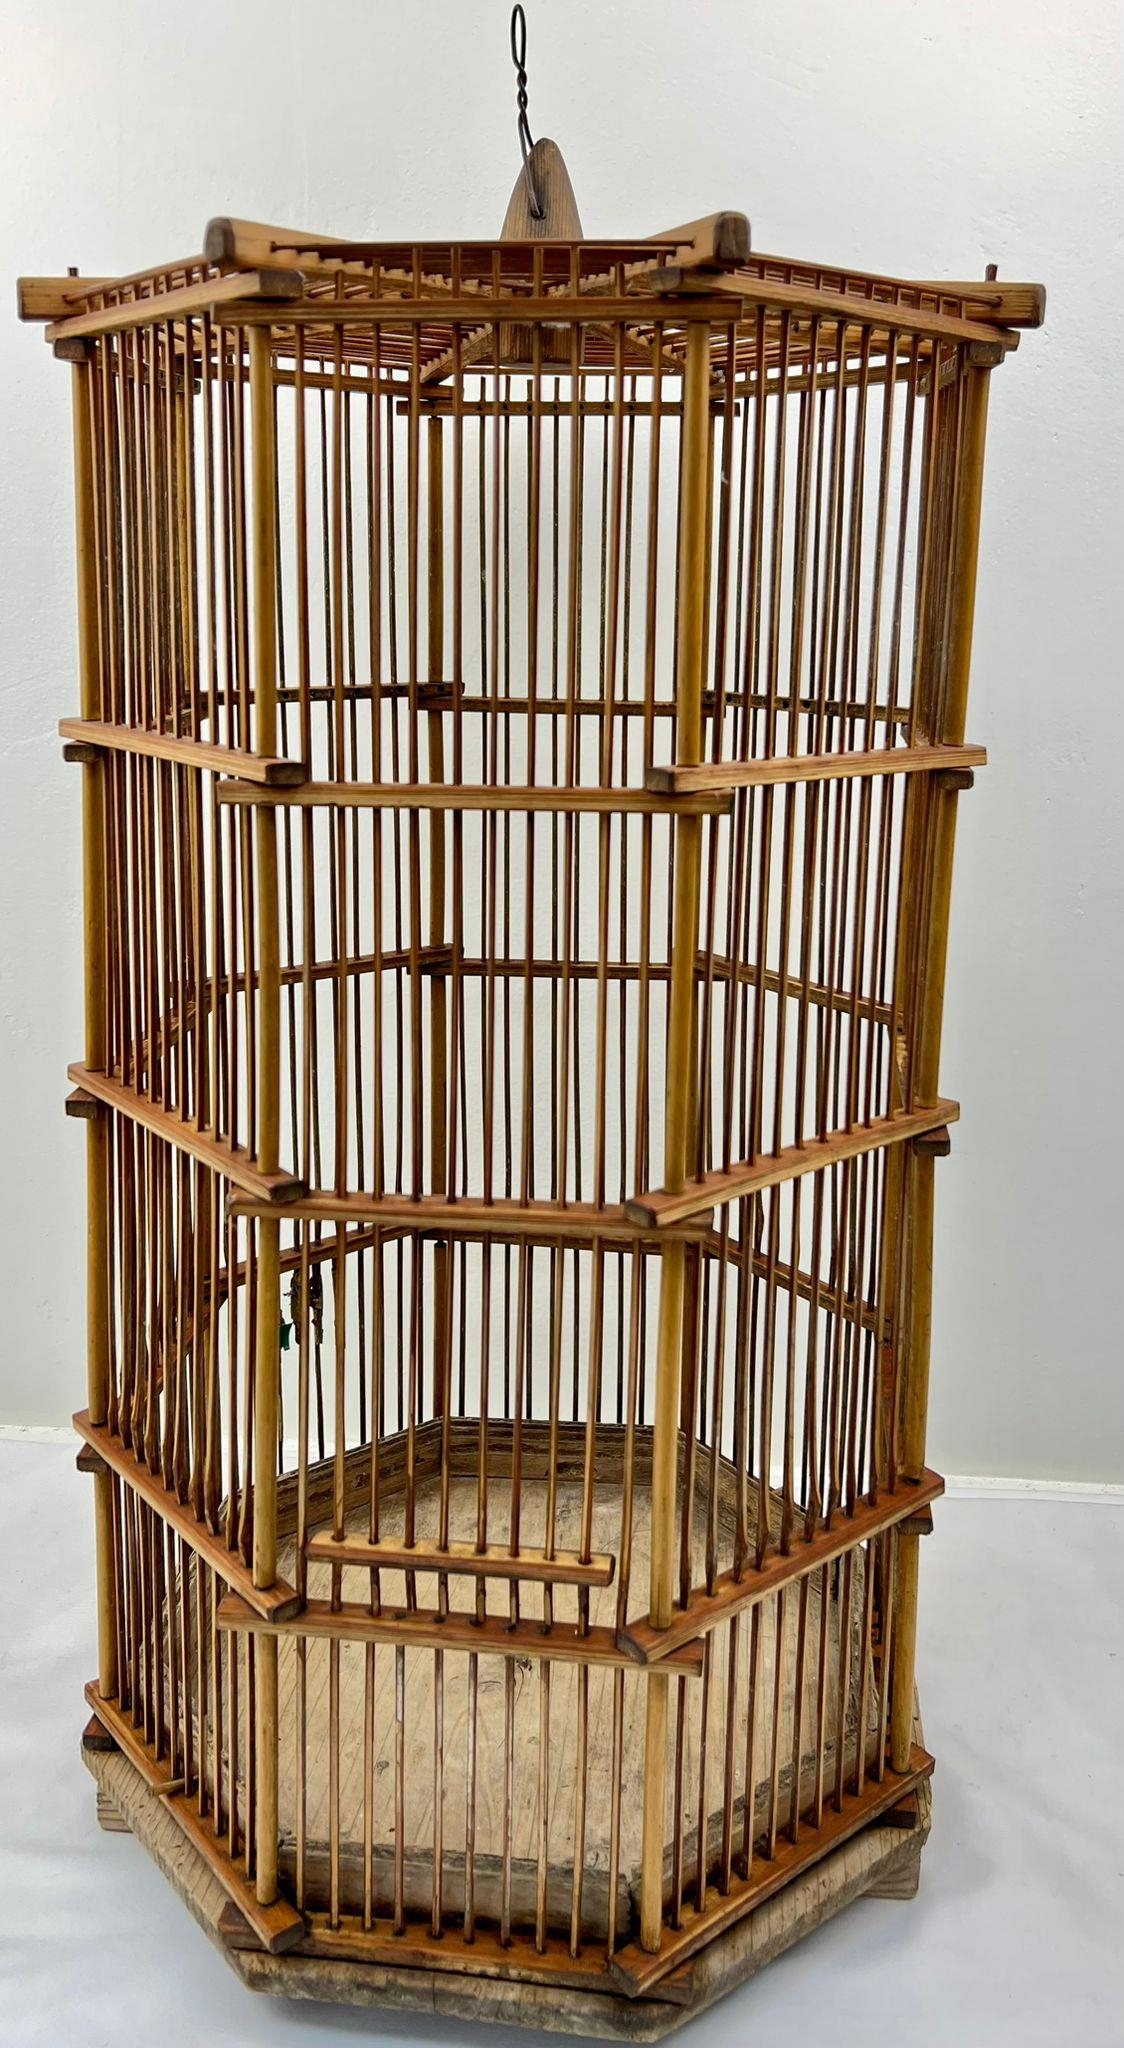 A VERY RARE ANTIQUE CHINESE BAMBOO BIRD CAGE FROM THE LATE 1800'S . HIGH HEXAGONAL DESIGN AND IN